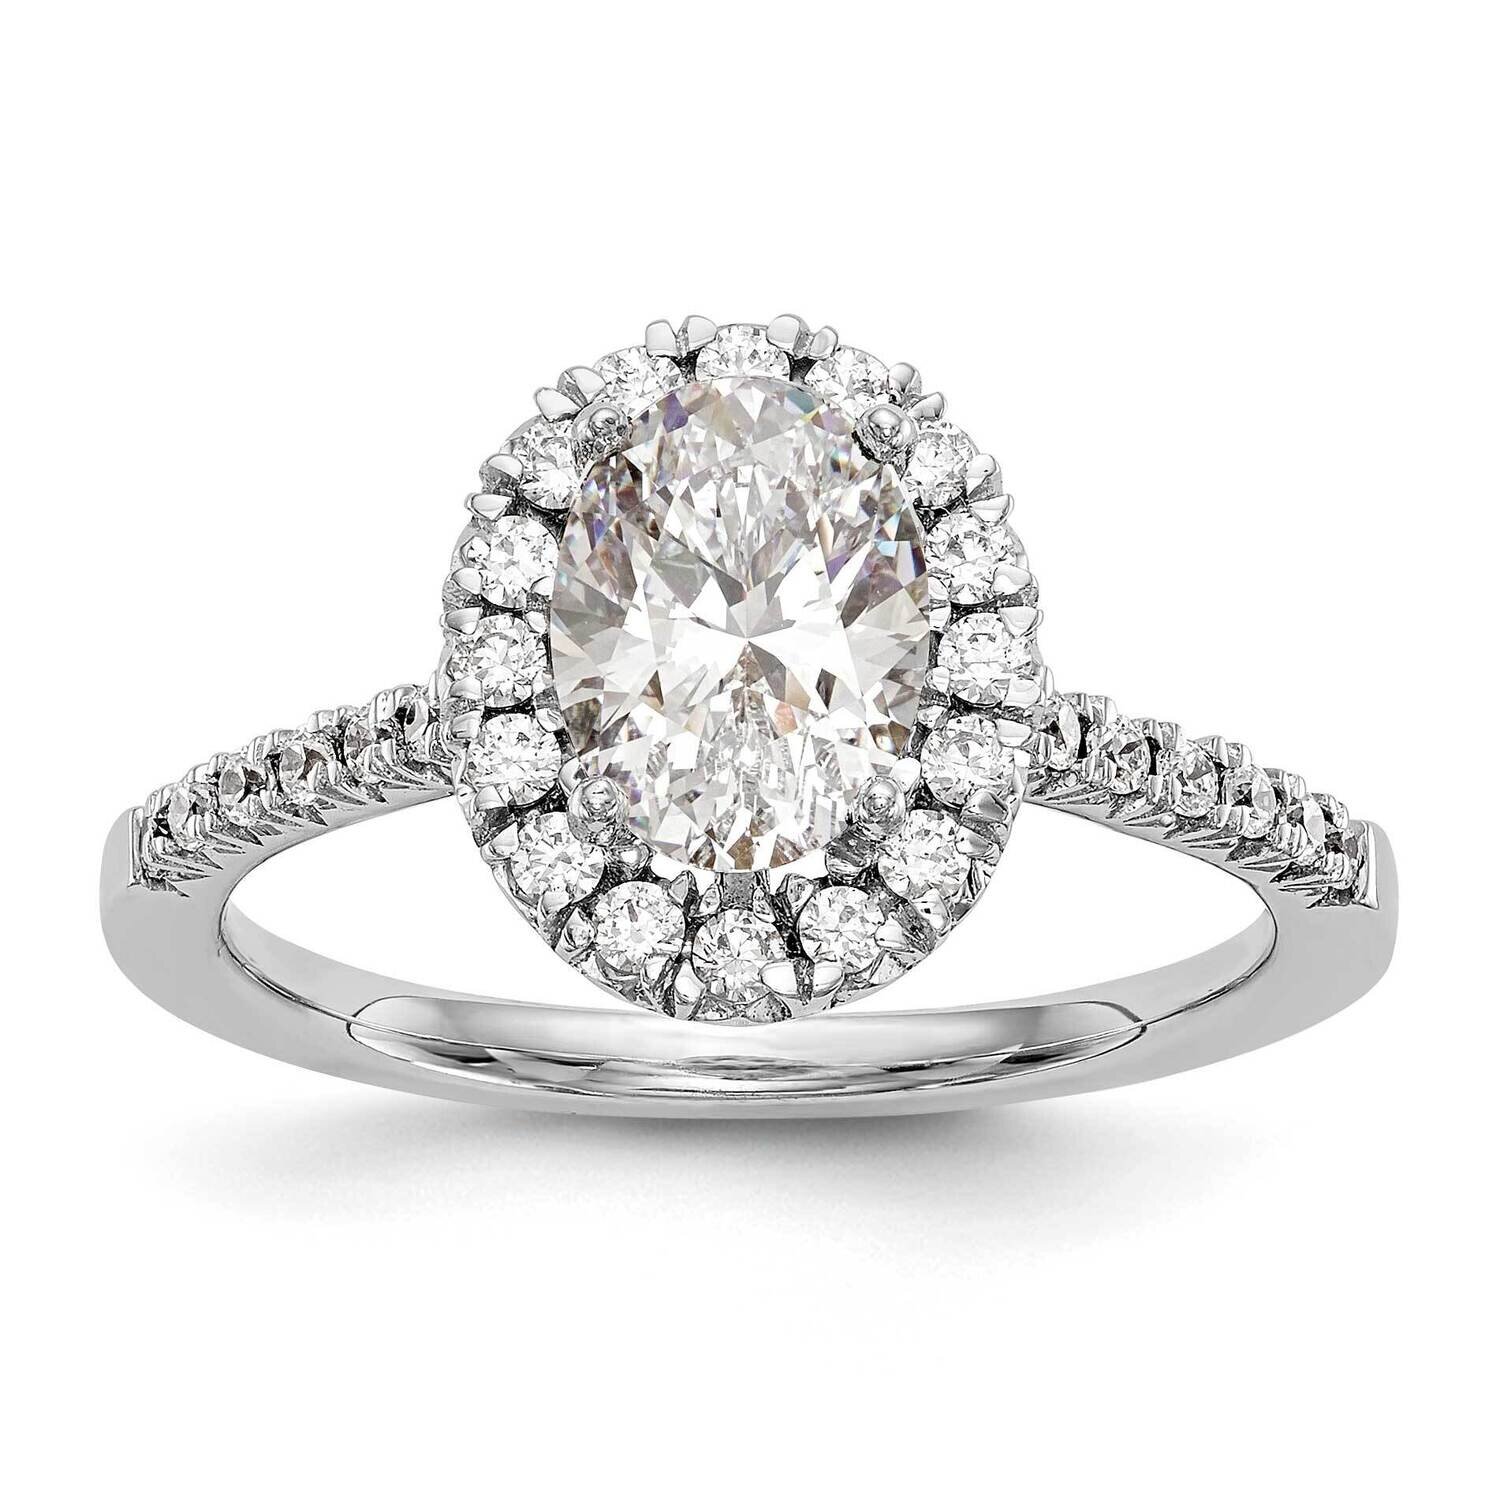 Oval Halo Engagement Lab Grown Diamond Si1/Si2, G H I, Semi-Mount Ring 14k White Gold RM2058E-050-7WLG